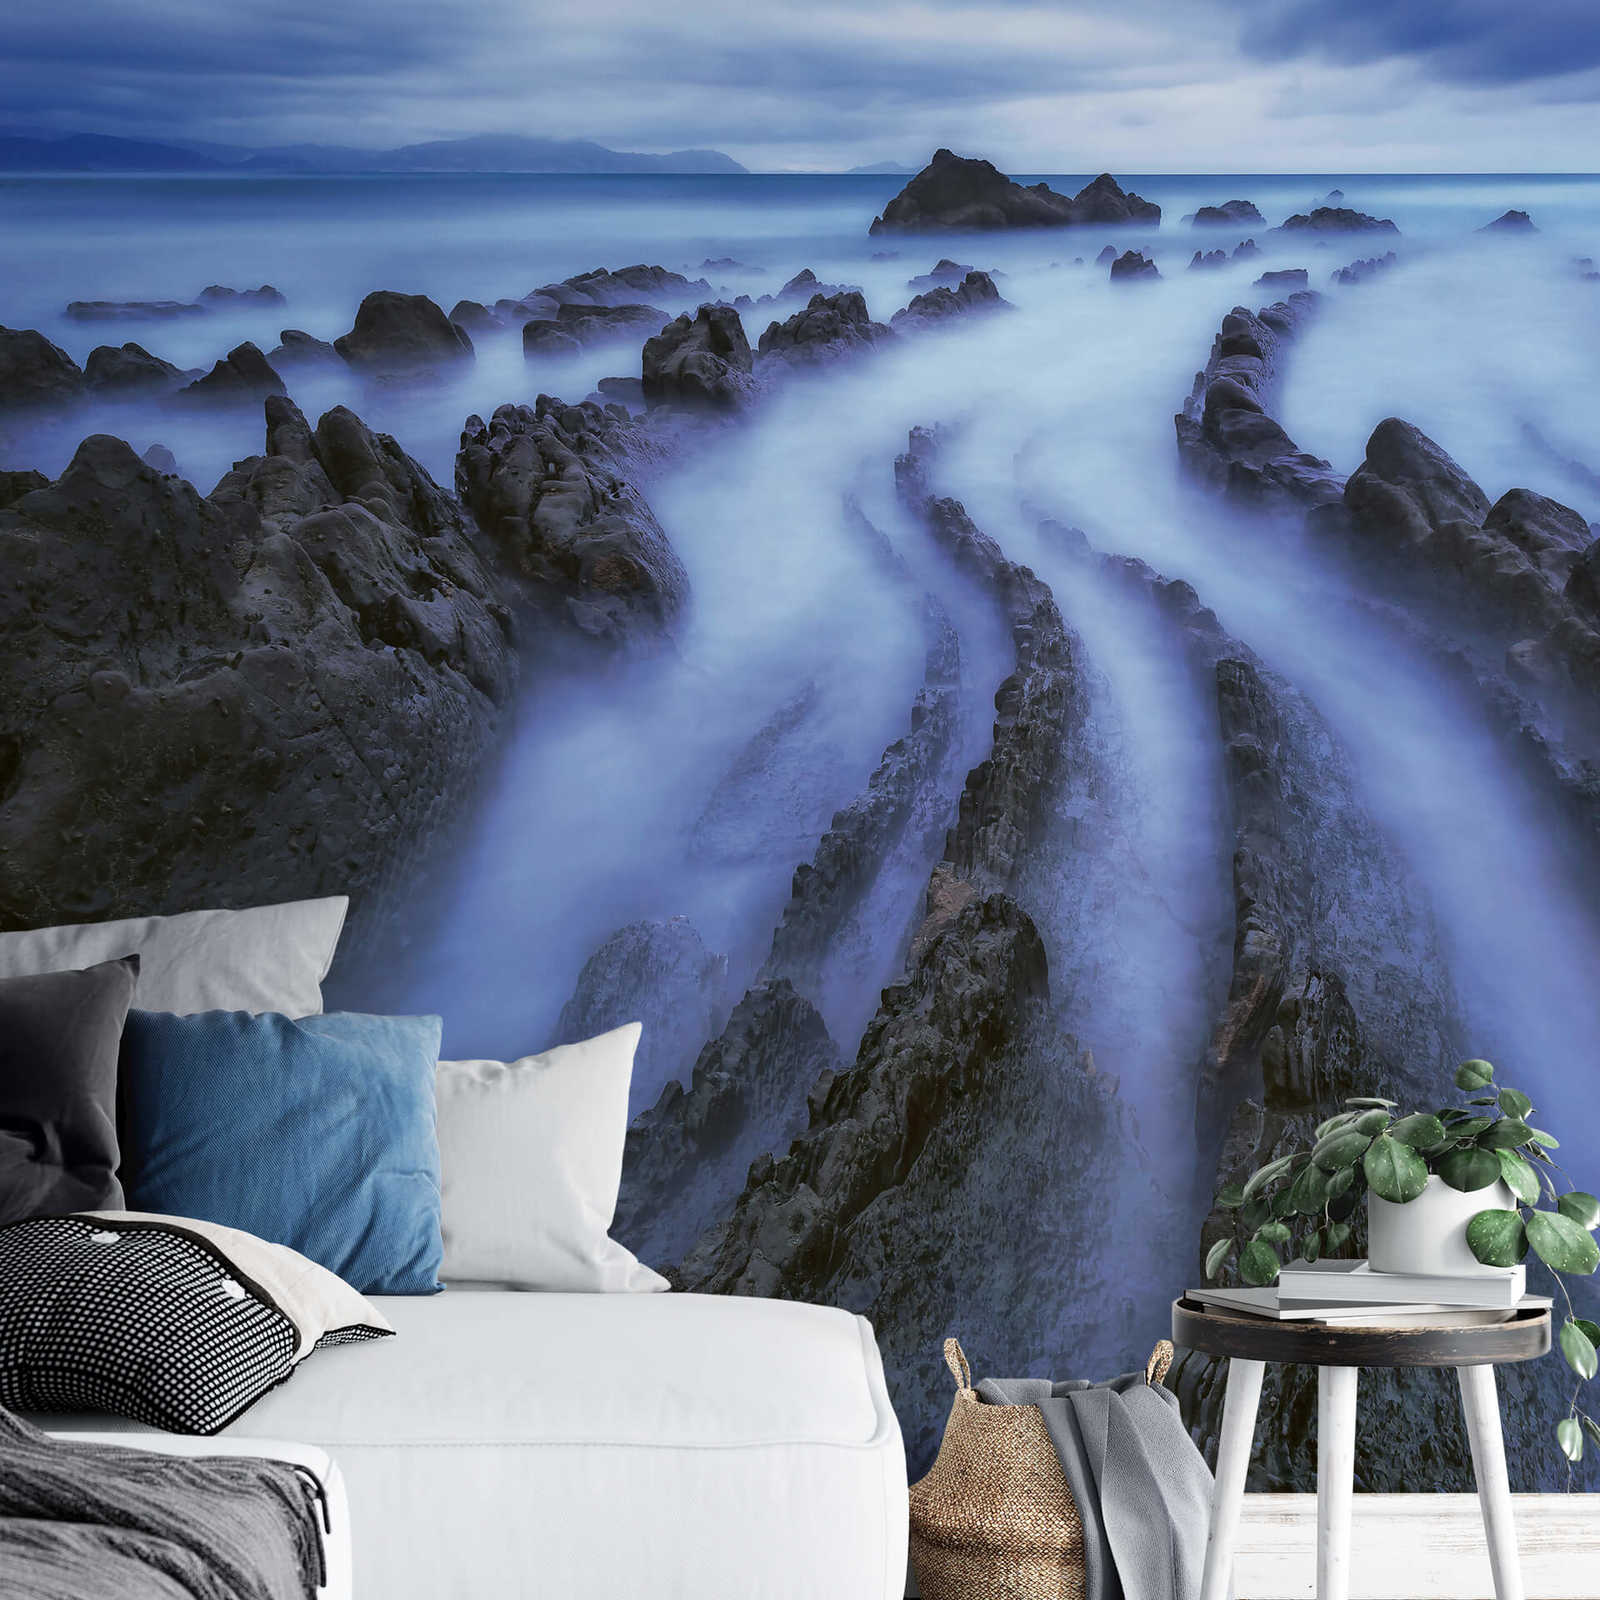             Sea with fog mural - blue, grey, white
        